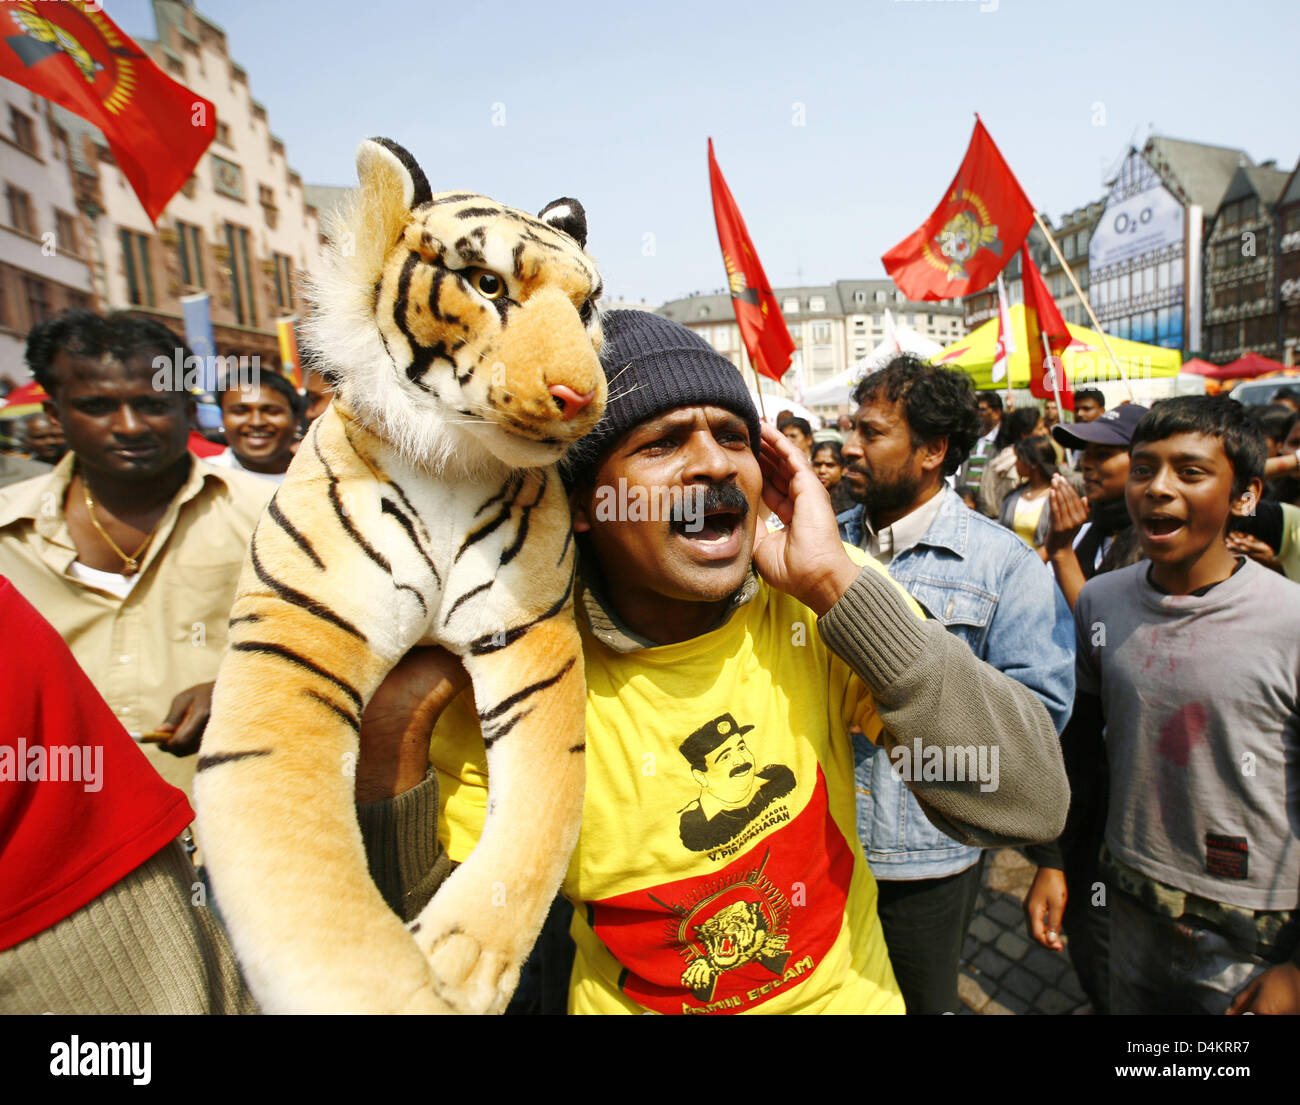 followers-of-the-liberation-tigers-of-tamil-eelam-ltte-demonstrate-D4KRR7.jpg